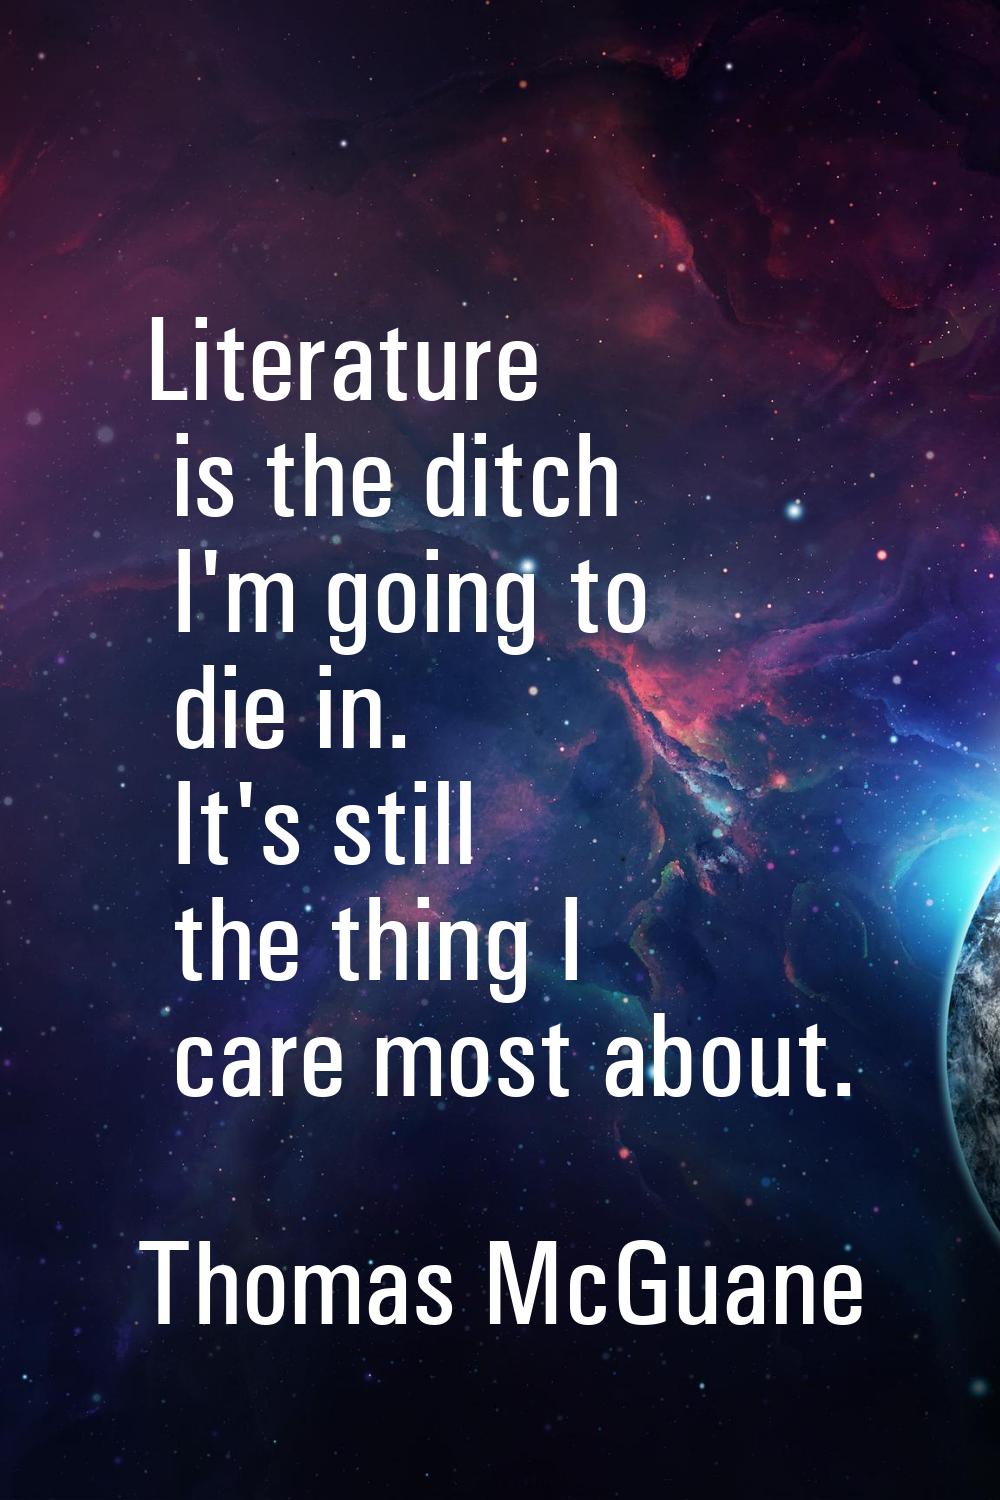 Literature is the ditch I'm going to die in. It's still the thing I care most about.